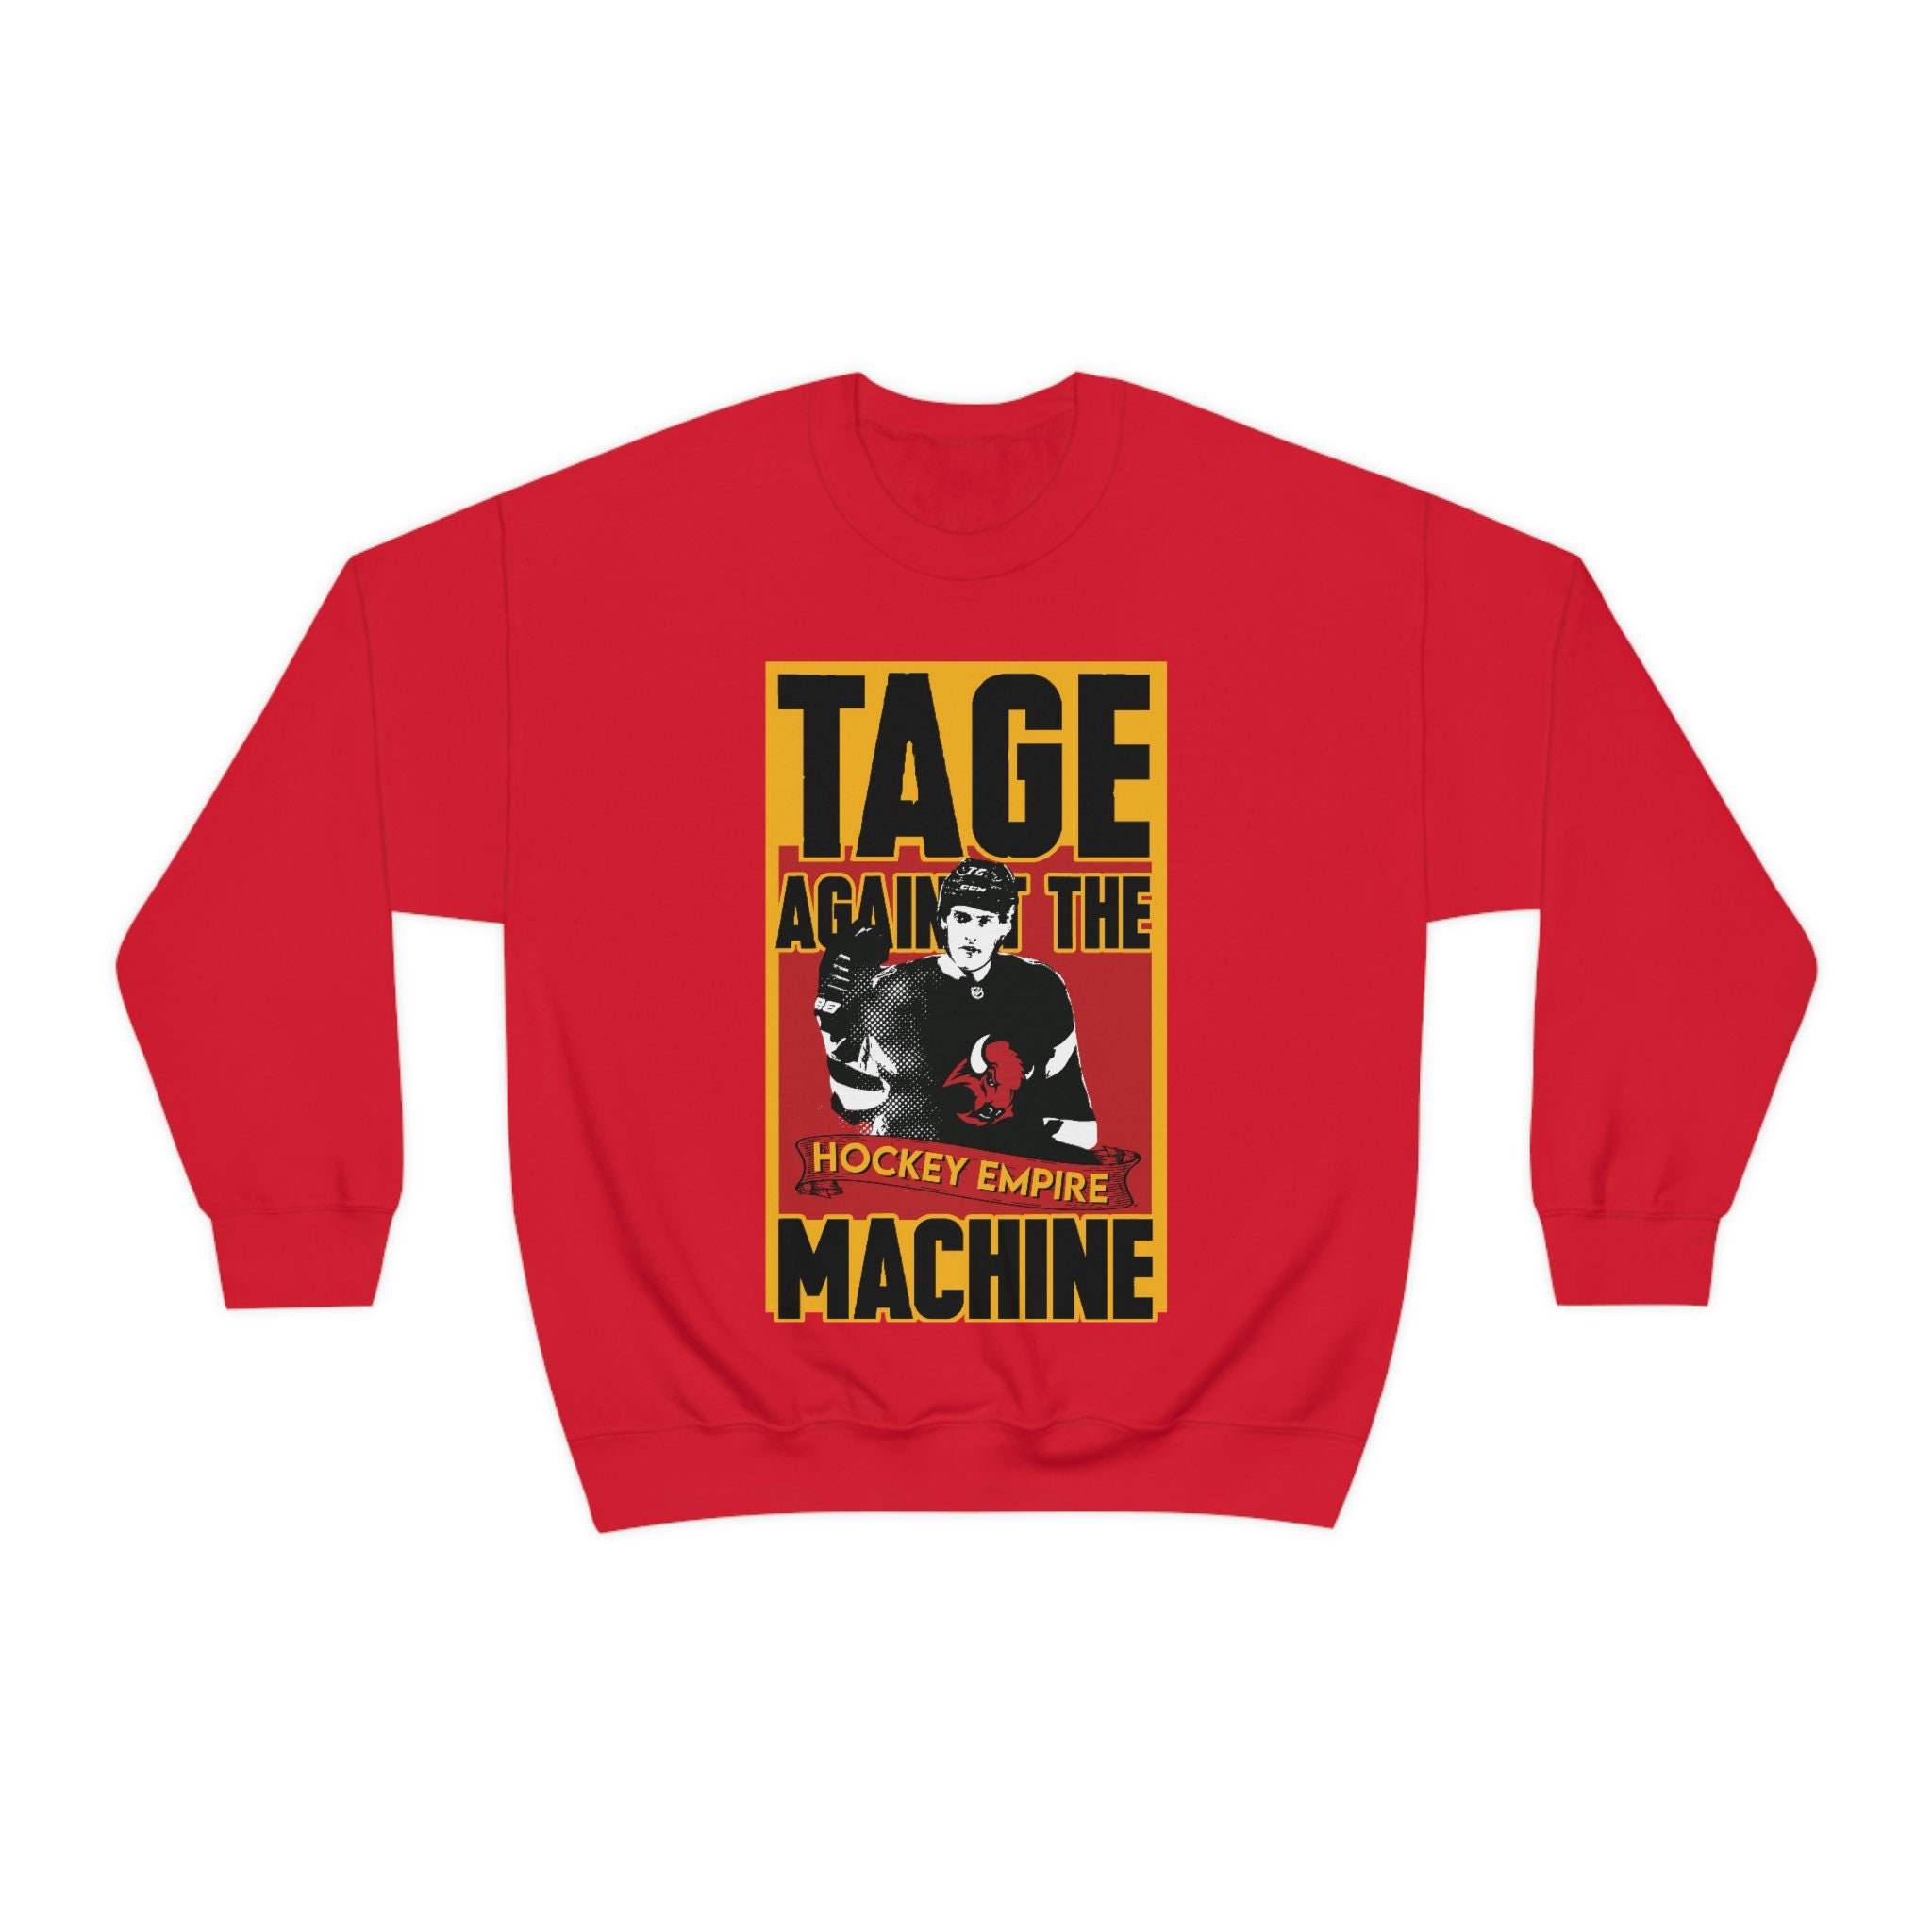 Tage Against The Machine - Tage Thompson - Buffalo Sabres Hoodie